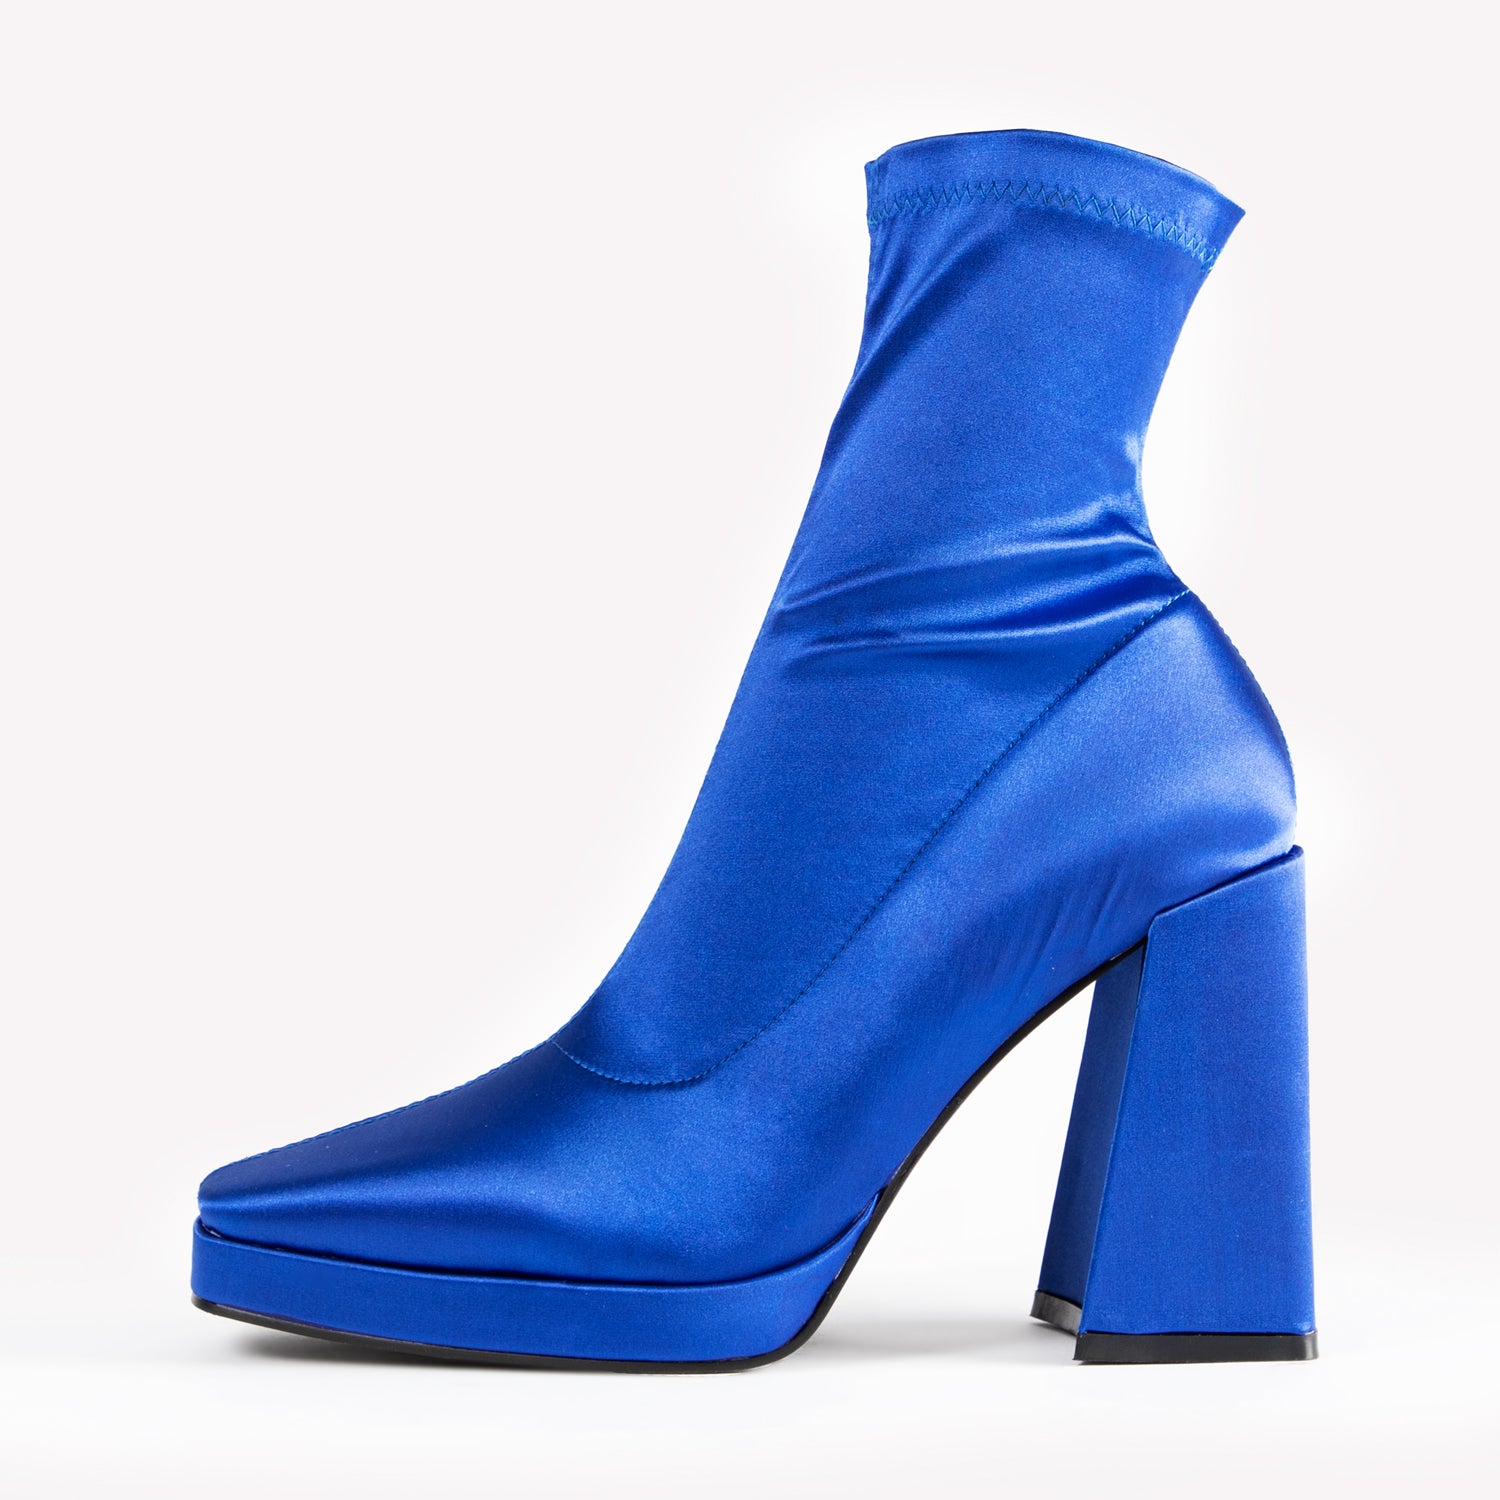 RAID Hartley Block Heeled Ankle Boot in Blue Satin